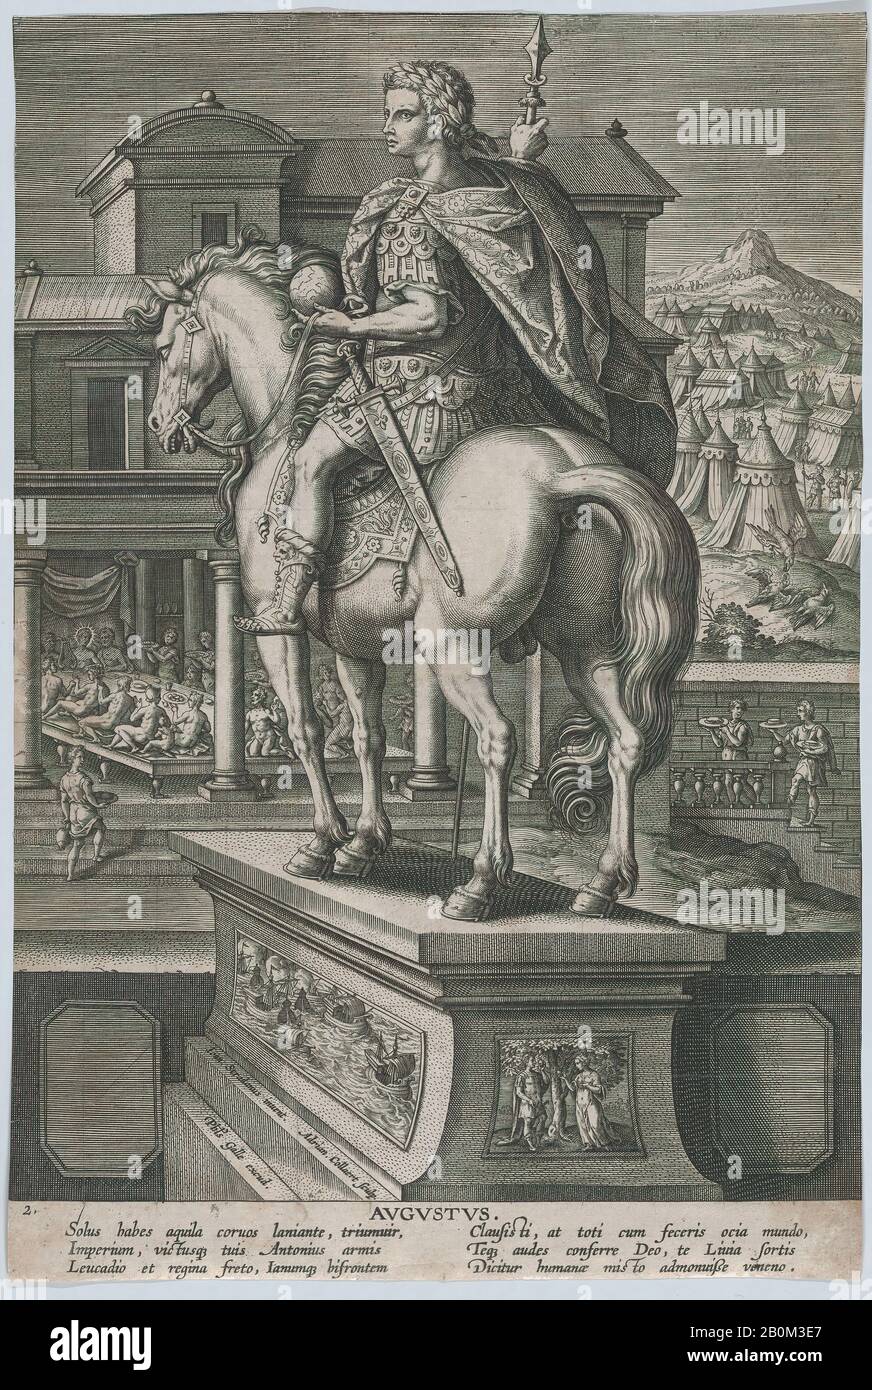 Adriaen Collaert, Plate 2: equestrian statue of Augustus, holding a globe and seen from behind, with a feast occurring at left in the background, from 'Roman Emperors on Horseback', 'Roman Emperors on Horseback', Adriaen Collaert (Netherlandish, Antwerp ca. 1560–1618 Antwerp), After Jan van der Straet, called Stradanus (Netherlandish, Bruges 1523–1605 Florence), ca. 1587–89, Engraving, Sheet (Trimmed): 12 11/16 × 8 9/16 in. (32.3 × 21.7 cm), Prints Stock Photo